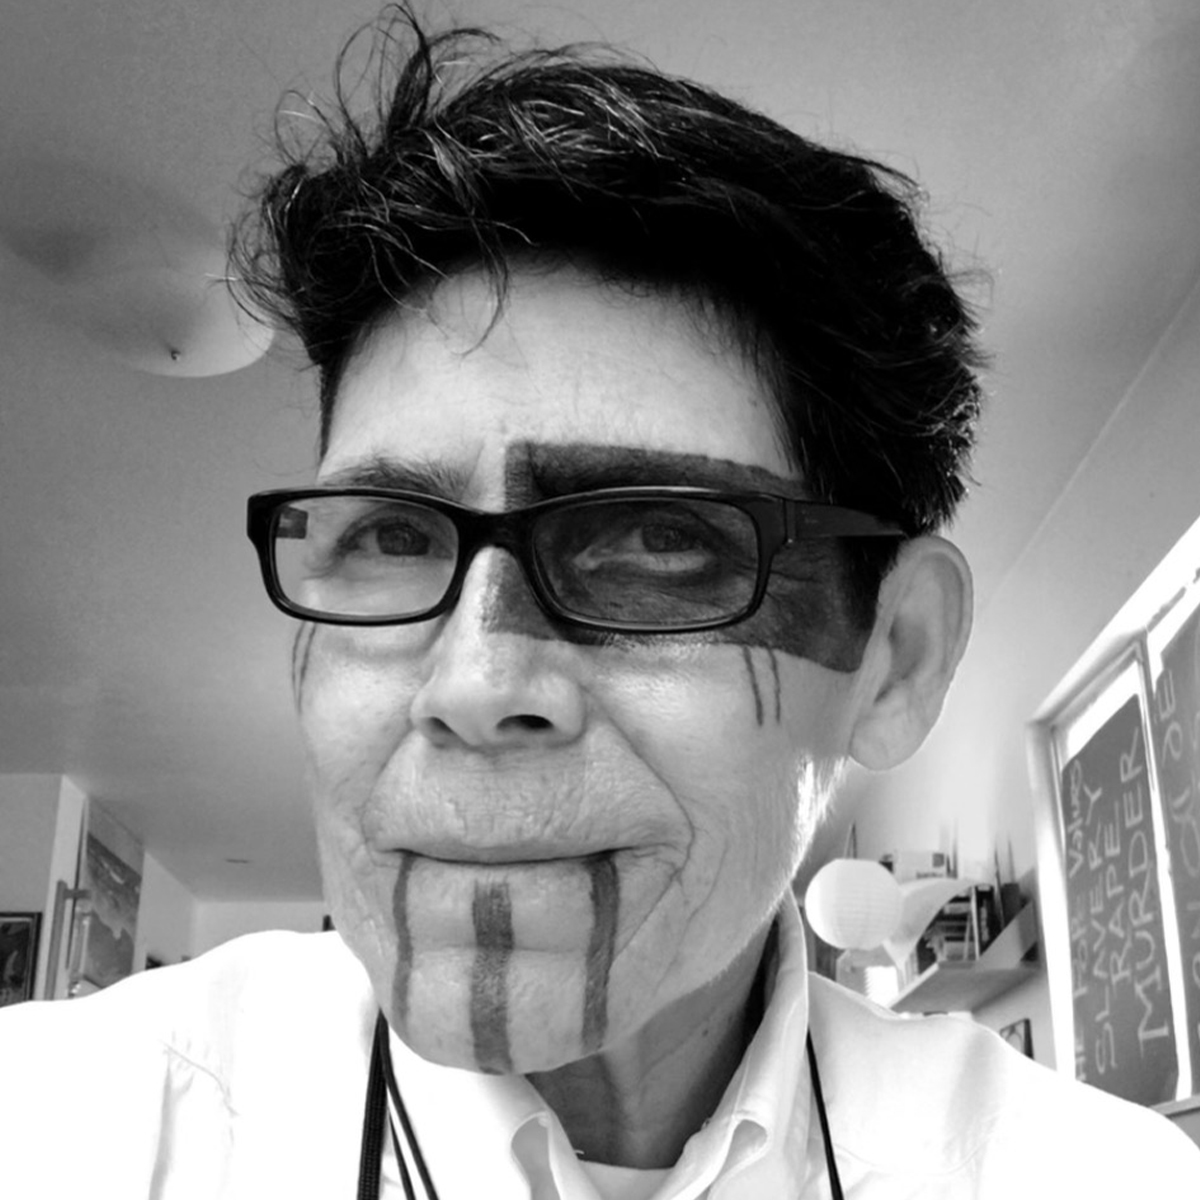 L. Frank black and white portrait. L. Frank is Tongva & Ajachemem & Rarámuri Two-Spirit person. Her hair is short and is a dark-color. In the photo L. Frank is wearing dark-rimmed glasses, and has Indigenous tattoos over one eye and three lines down her chin. 